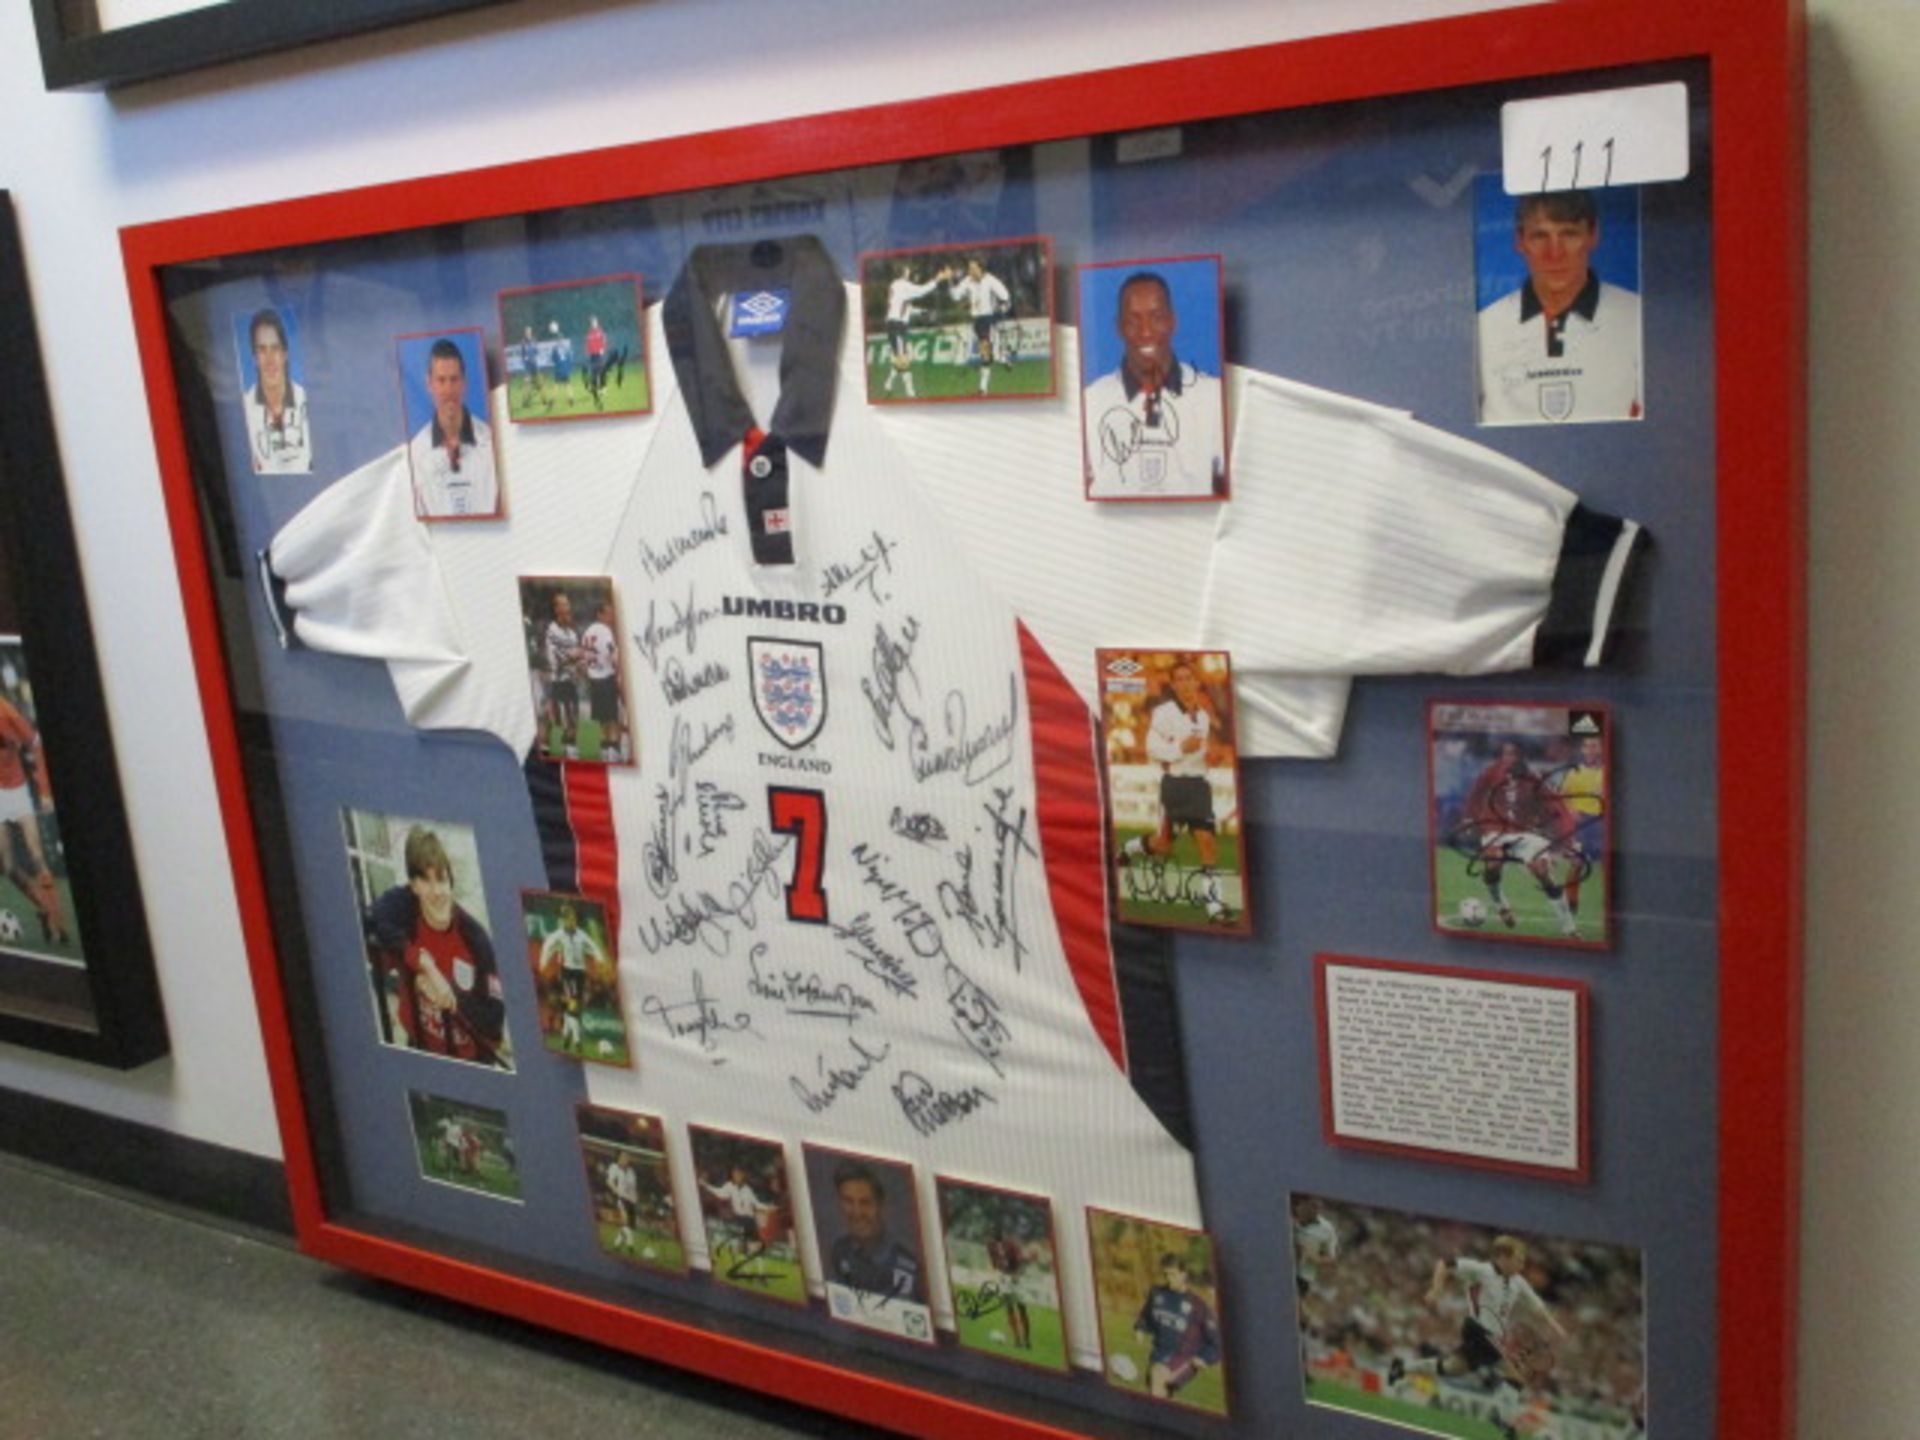 David Beckham's No. 7 - England vs Italy shirt (1997- World Cup Qualifier - Rome) , (50-1/2in w x